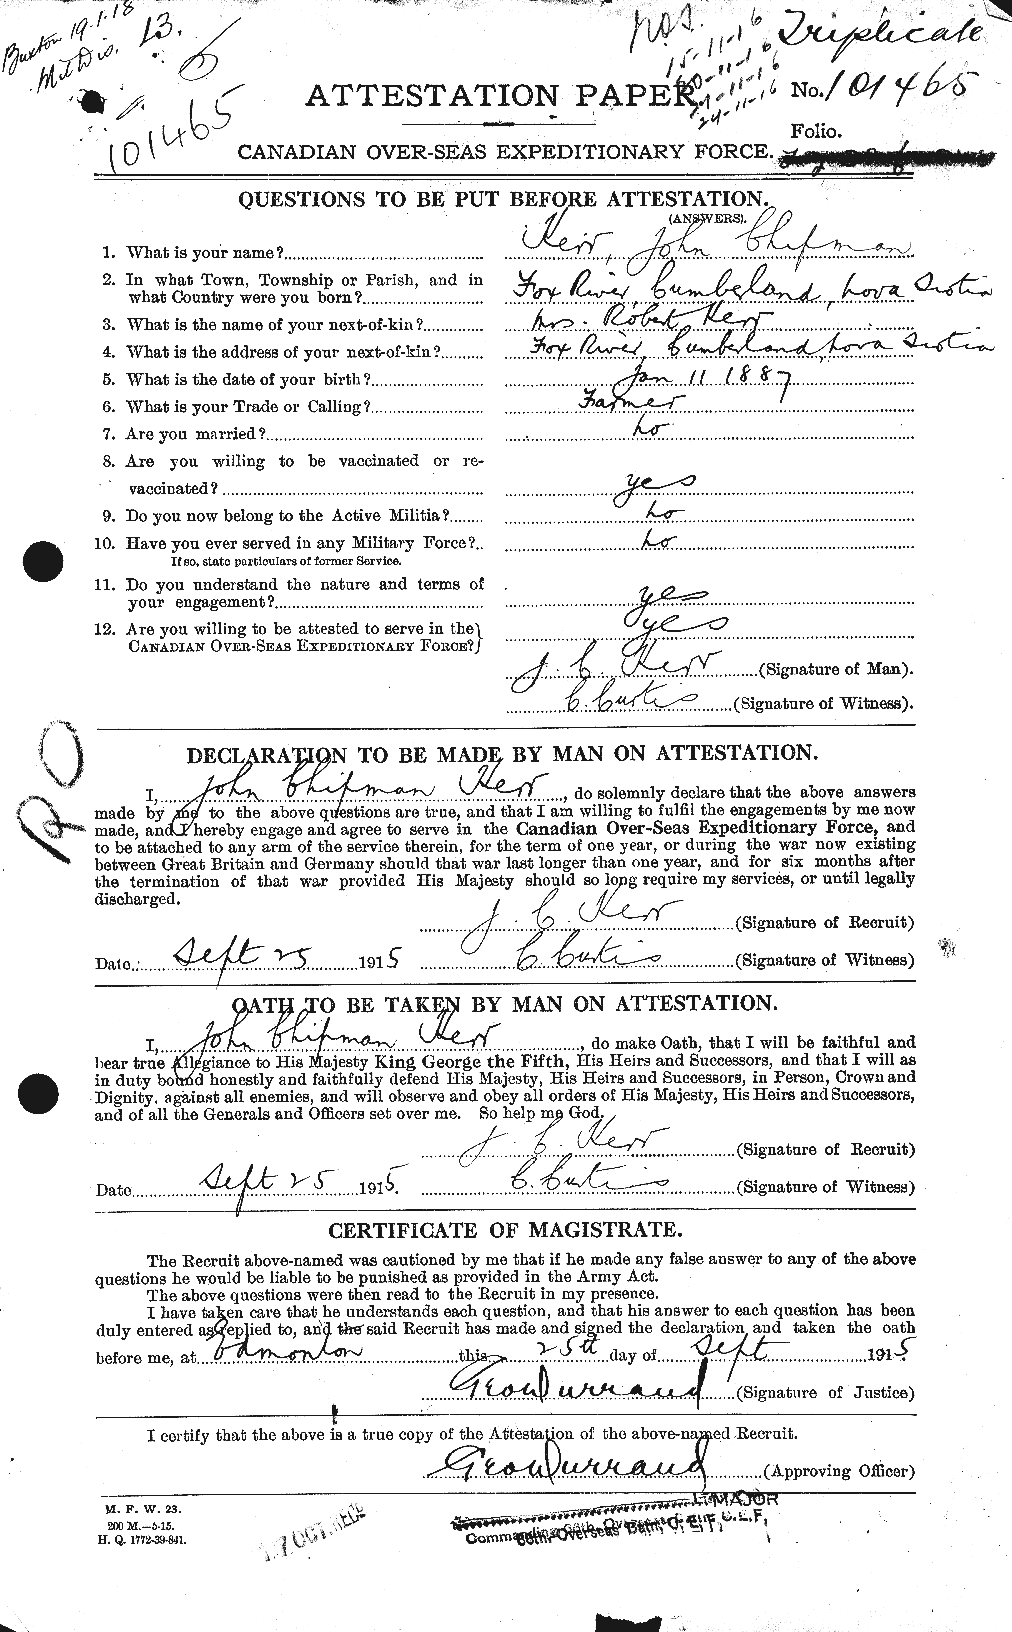 Personnel Records of the First World War - CEF 432068a